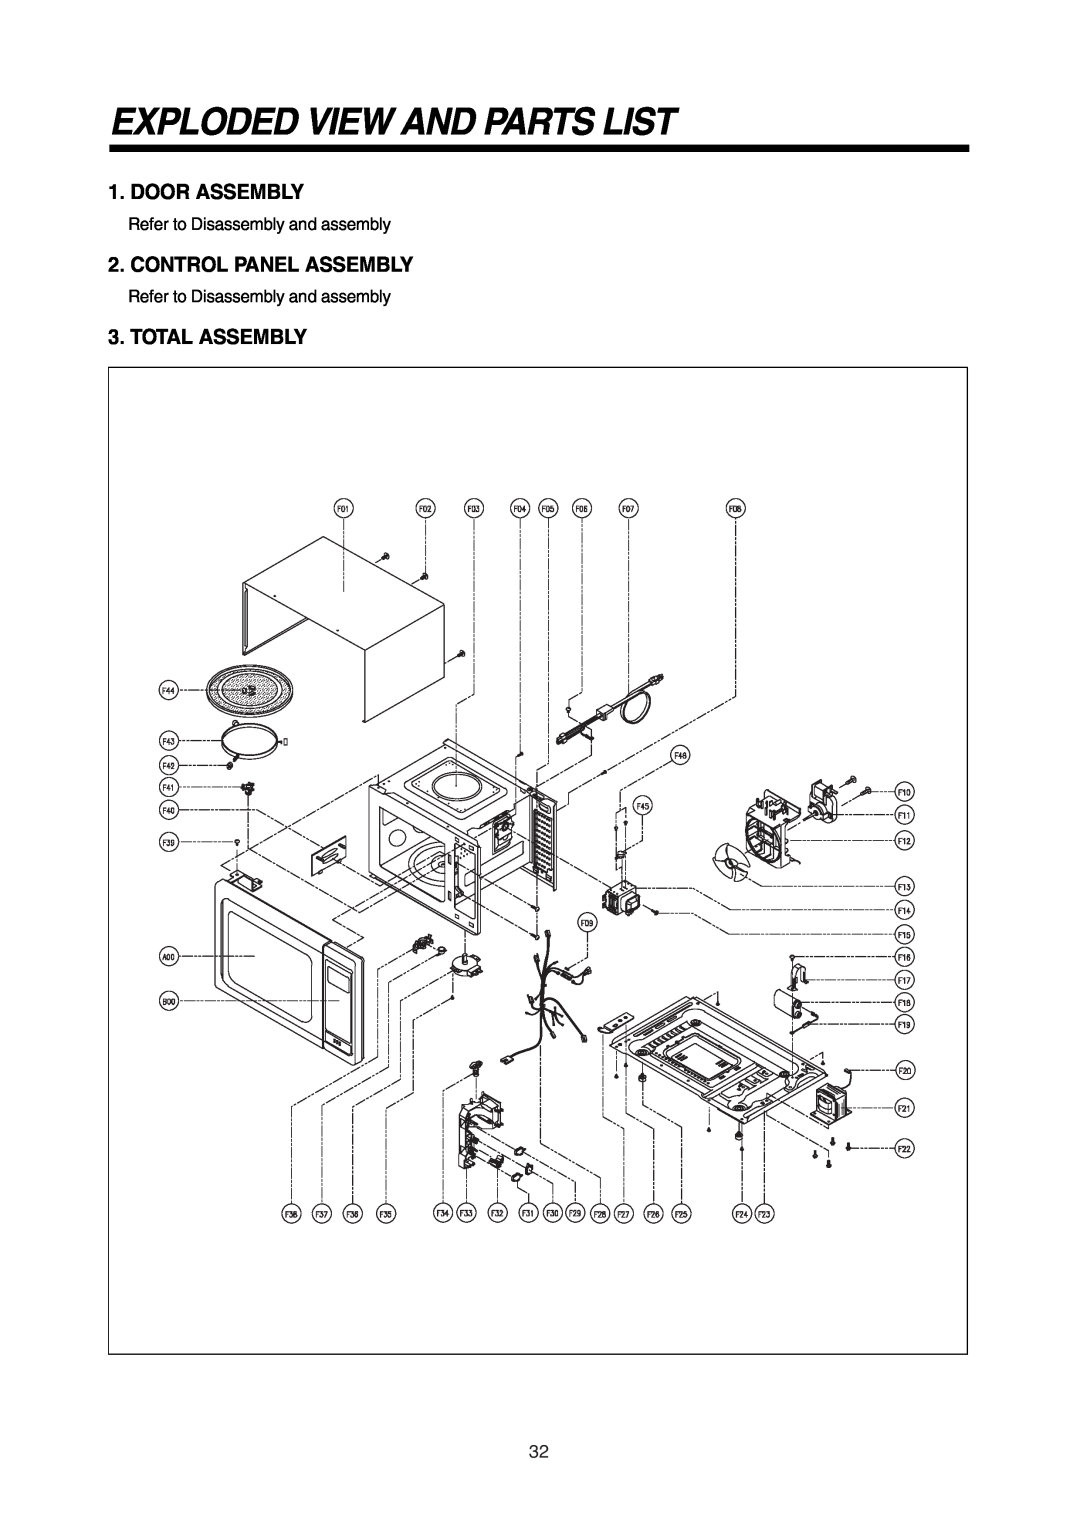 Daewoo 181GOA0A manual Exploded View And Parts List, Door Assembly, Control Panel Assembly, Total Assembly 